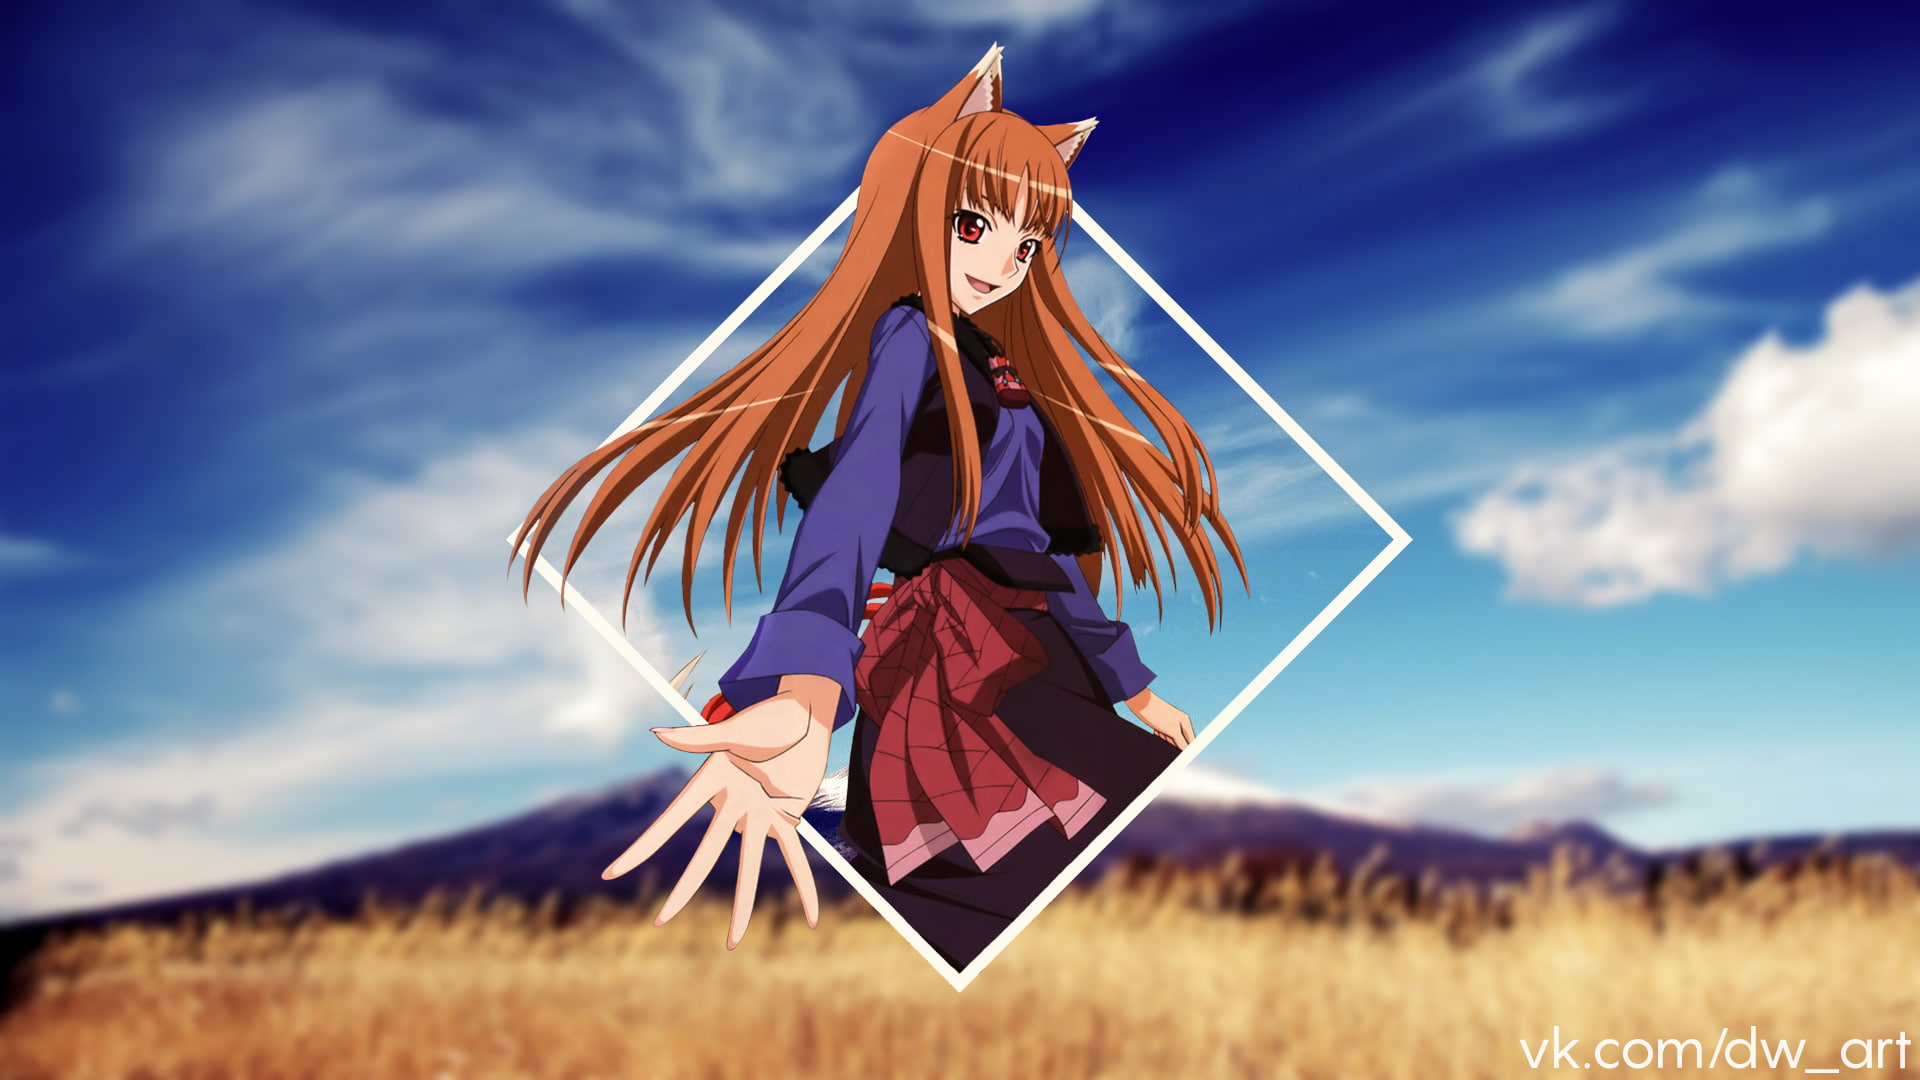 anime girls, Horo (Spice and Wolf), Holo, 2D, Photoshop, picture-in-picture